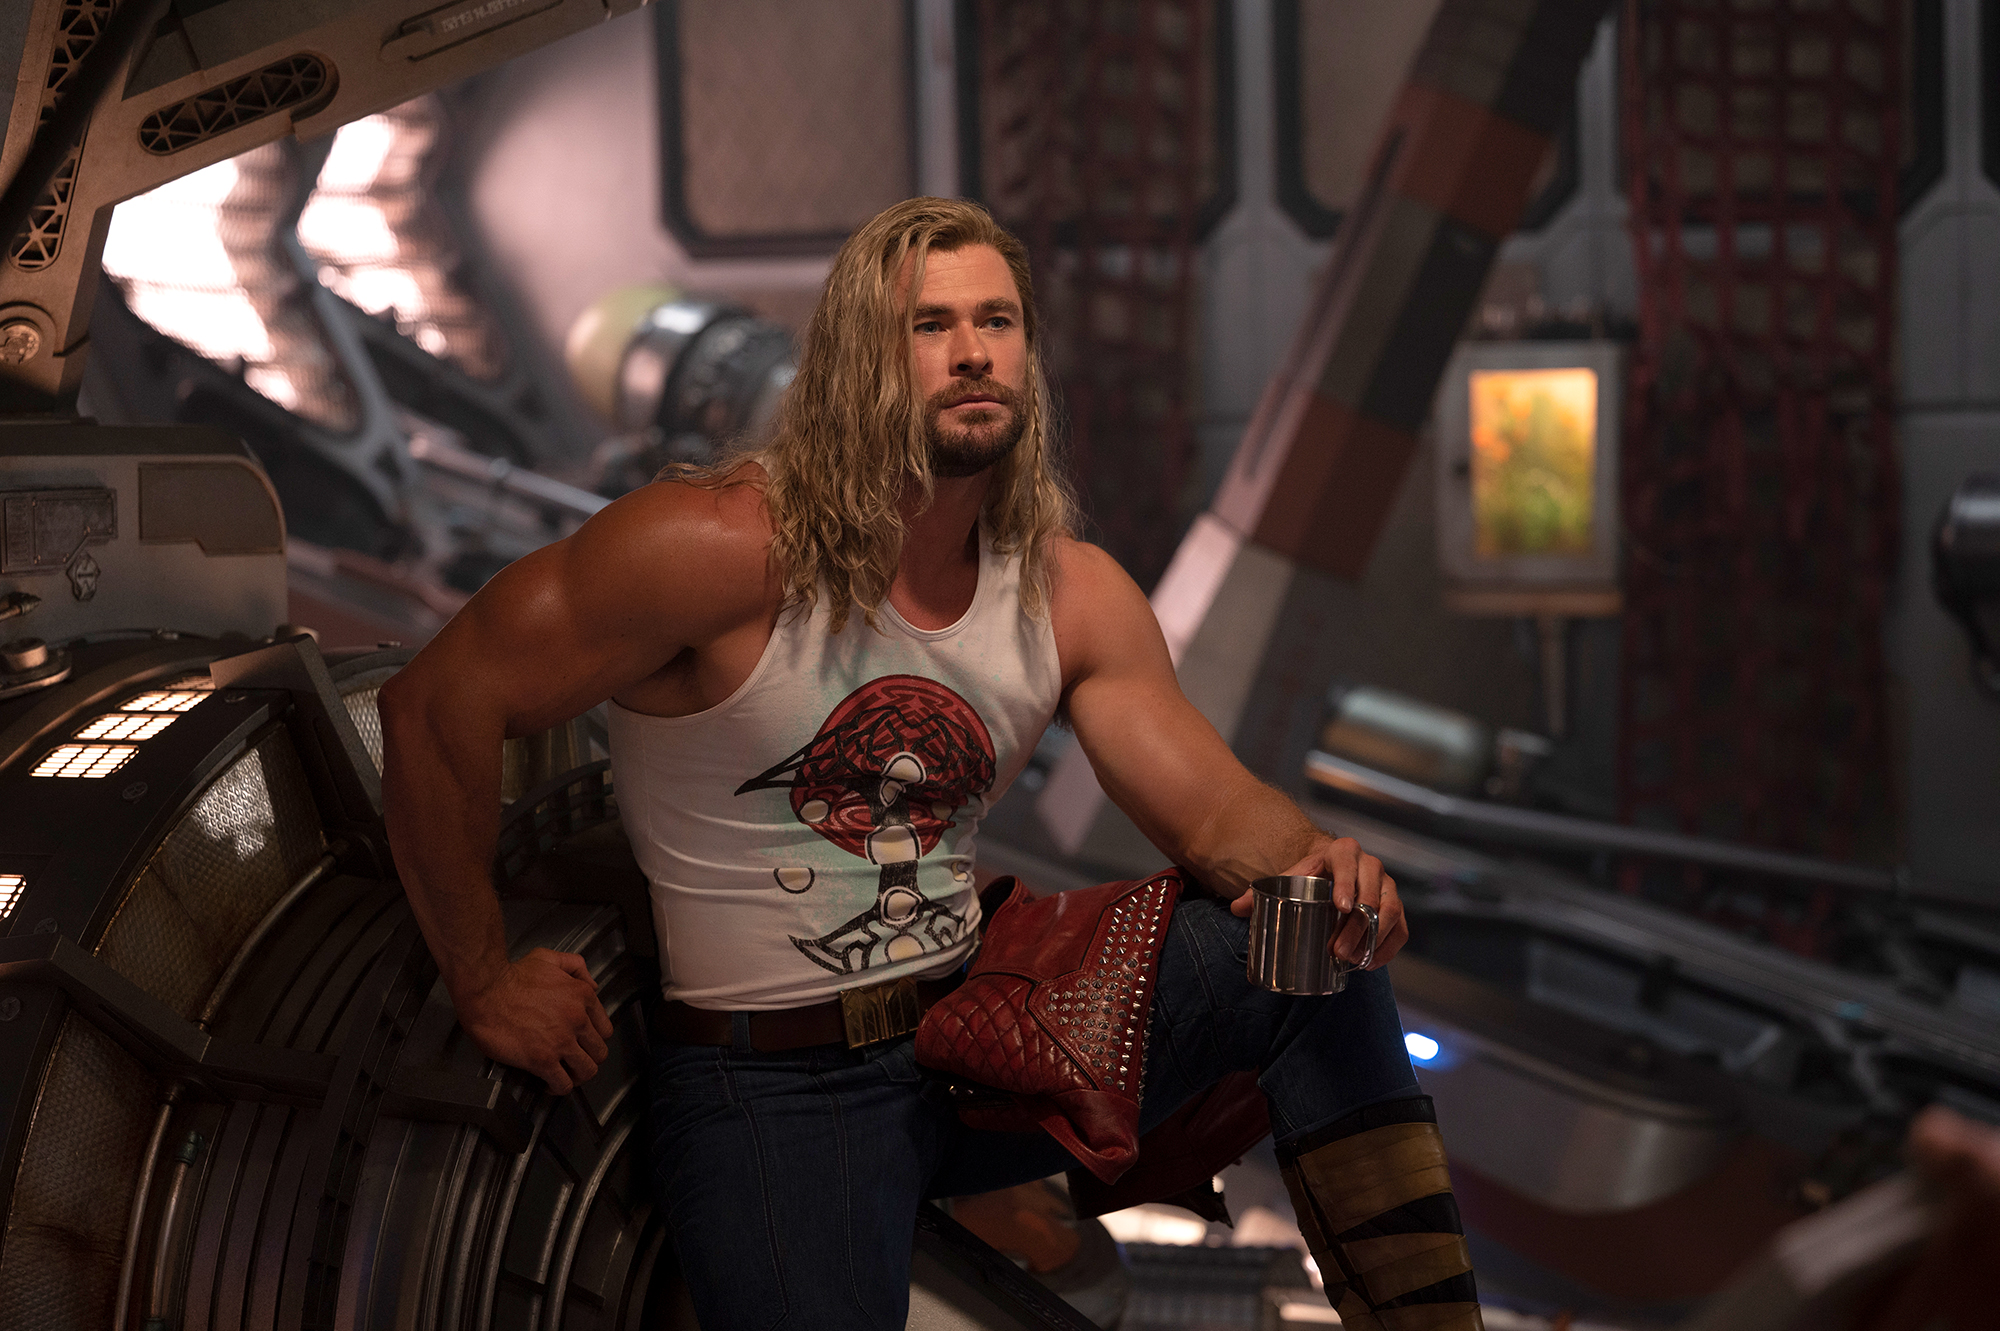 New Thor: Love and Thunder Photos Reveal Surprising CGI In Opening